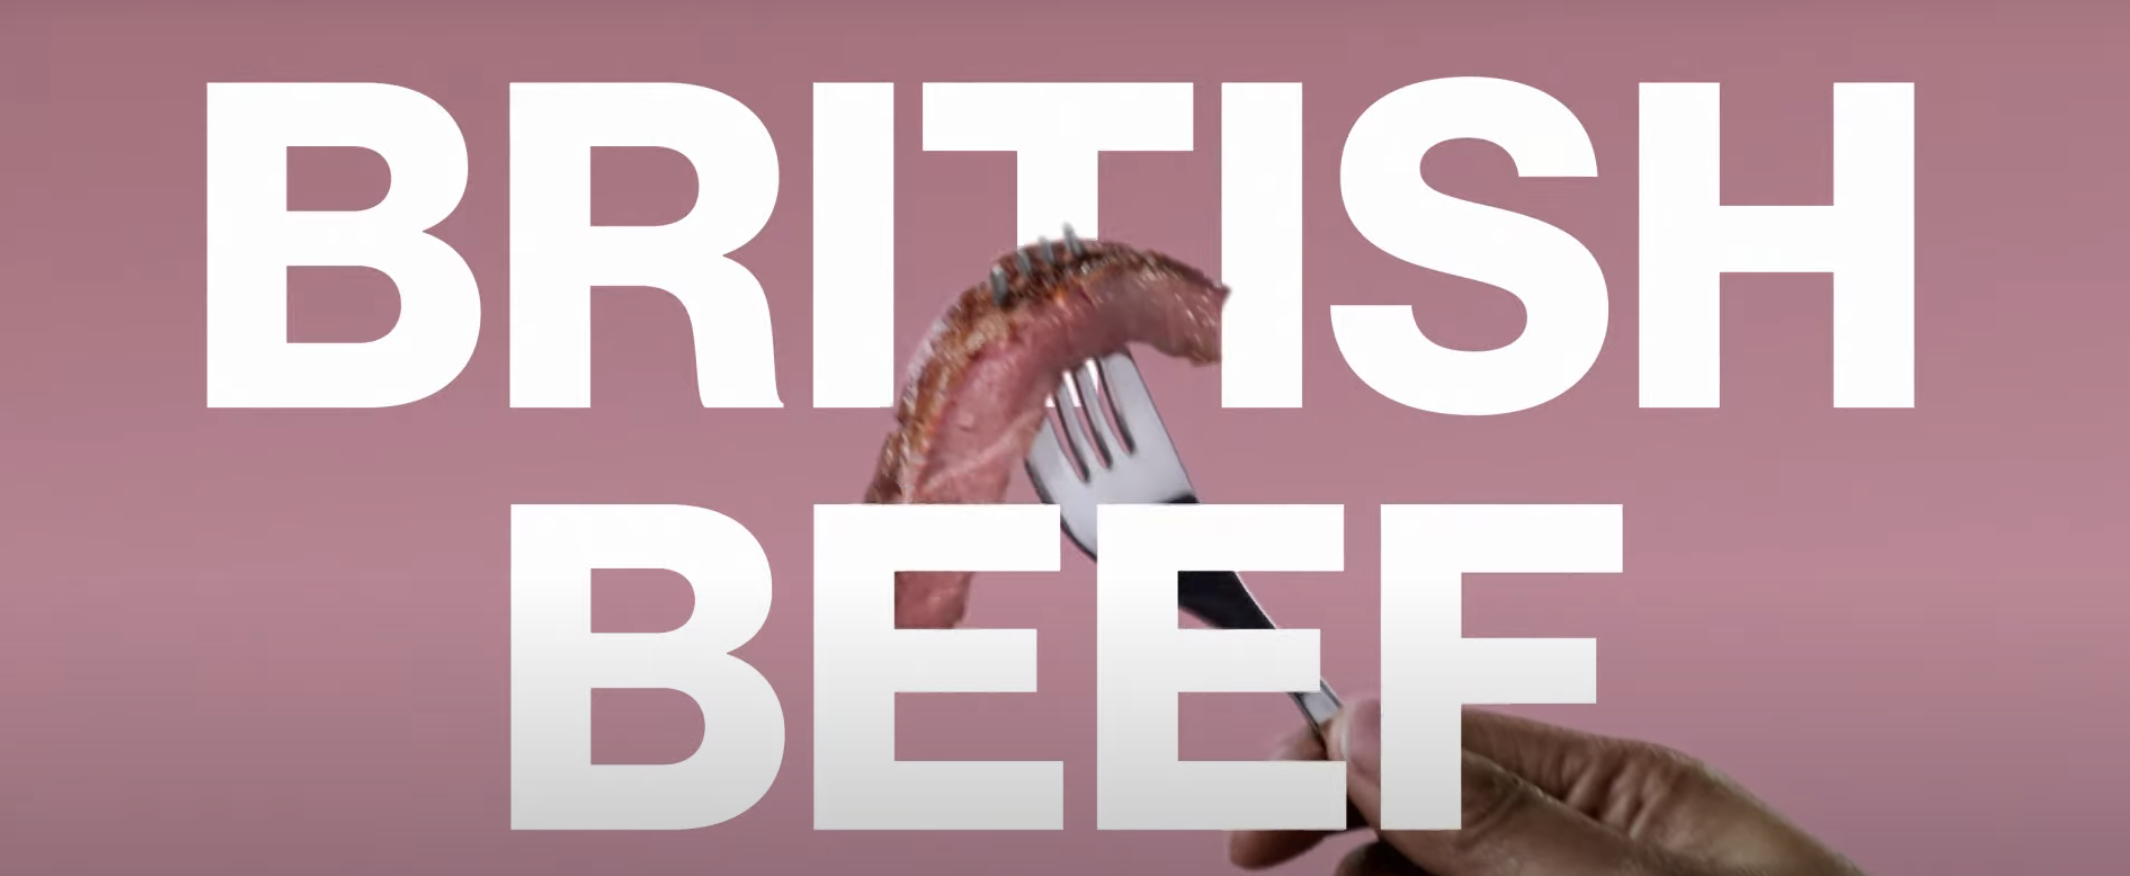 Text "British Beef" and a piece of meat on a fork